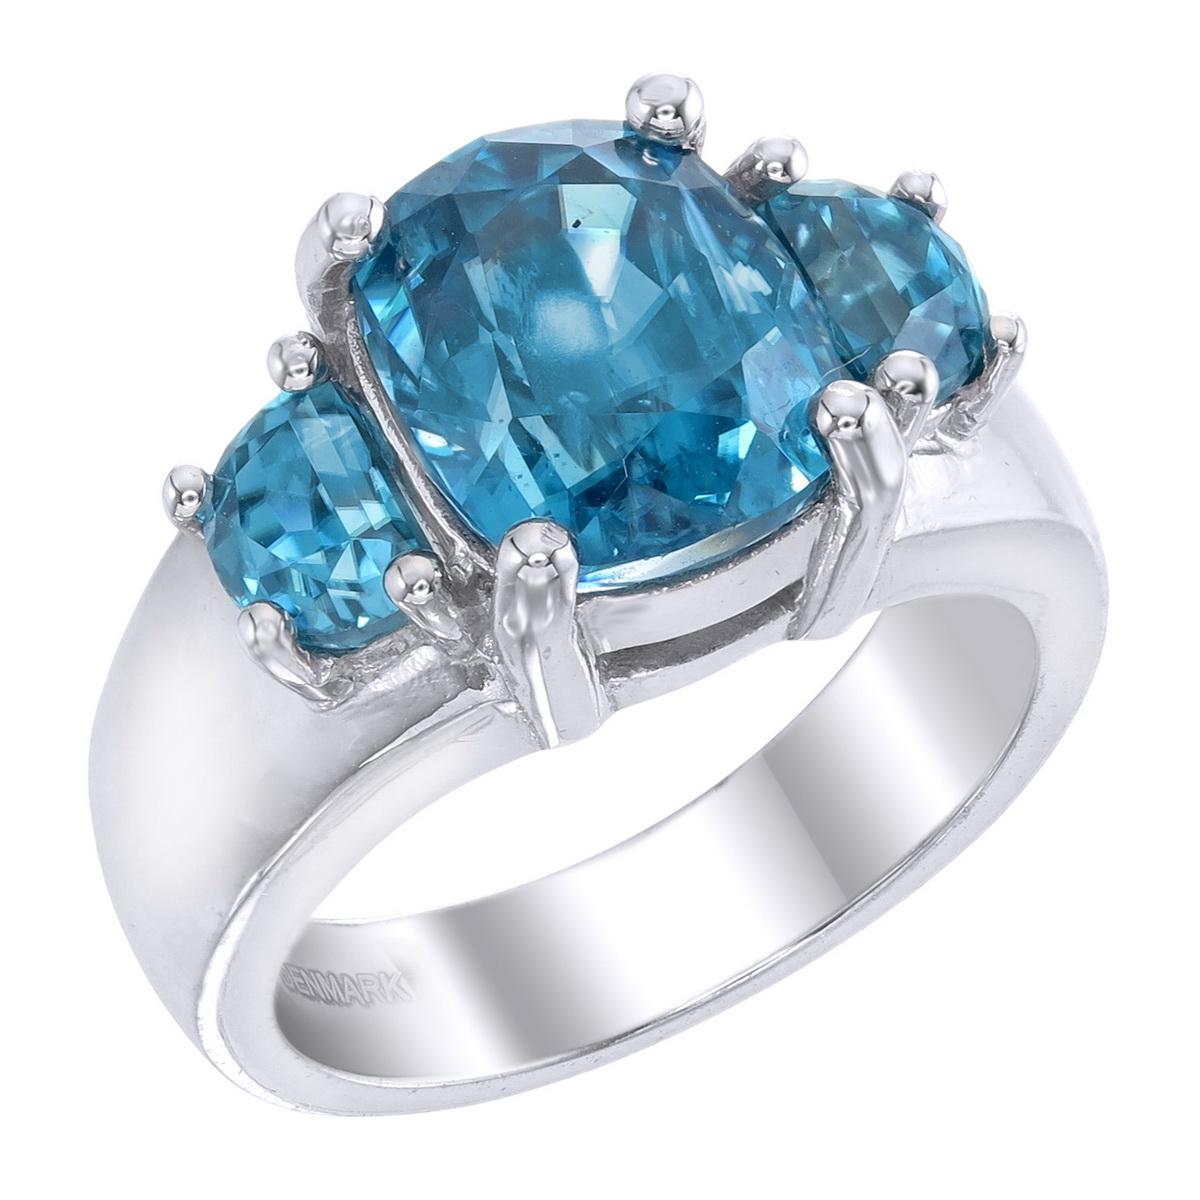 Orloff of Denmark; Natural Ocean Blue Zircon, Three-Stone ring set in 925 Sterling Silver.

Featured on this piece are three natural, ocean blue zircons mined, polished and cut in Ratanakiri, Cambodia.
Held securely by four button-prongs, these